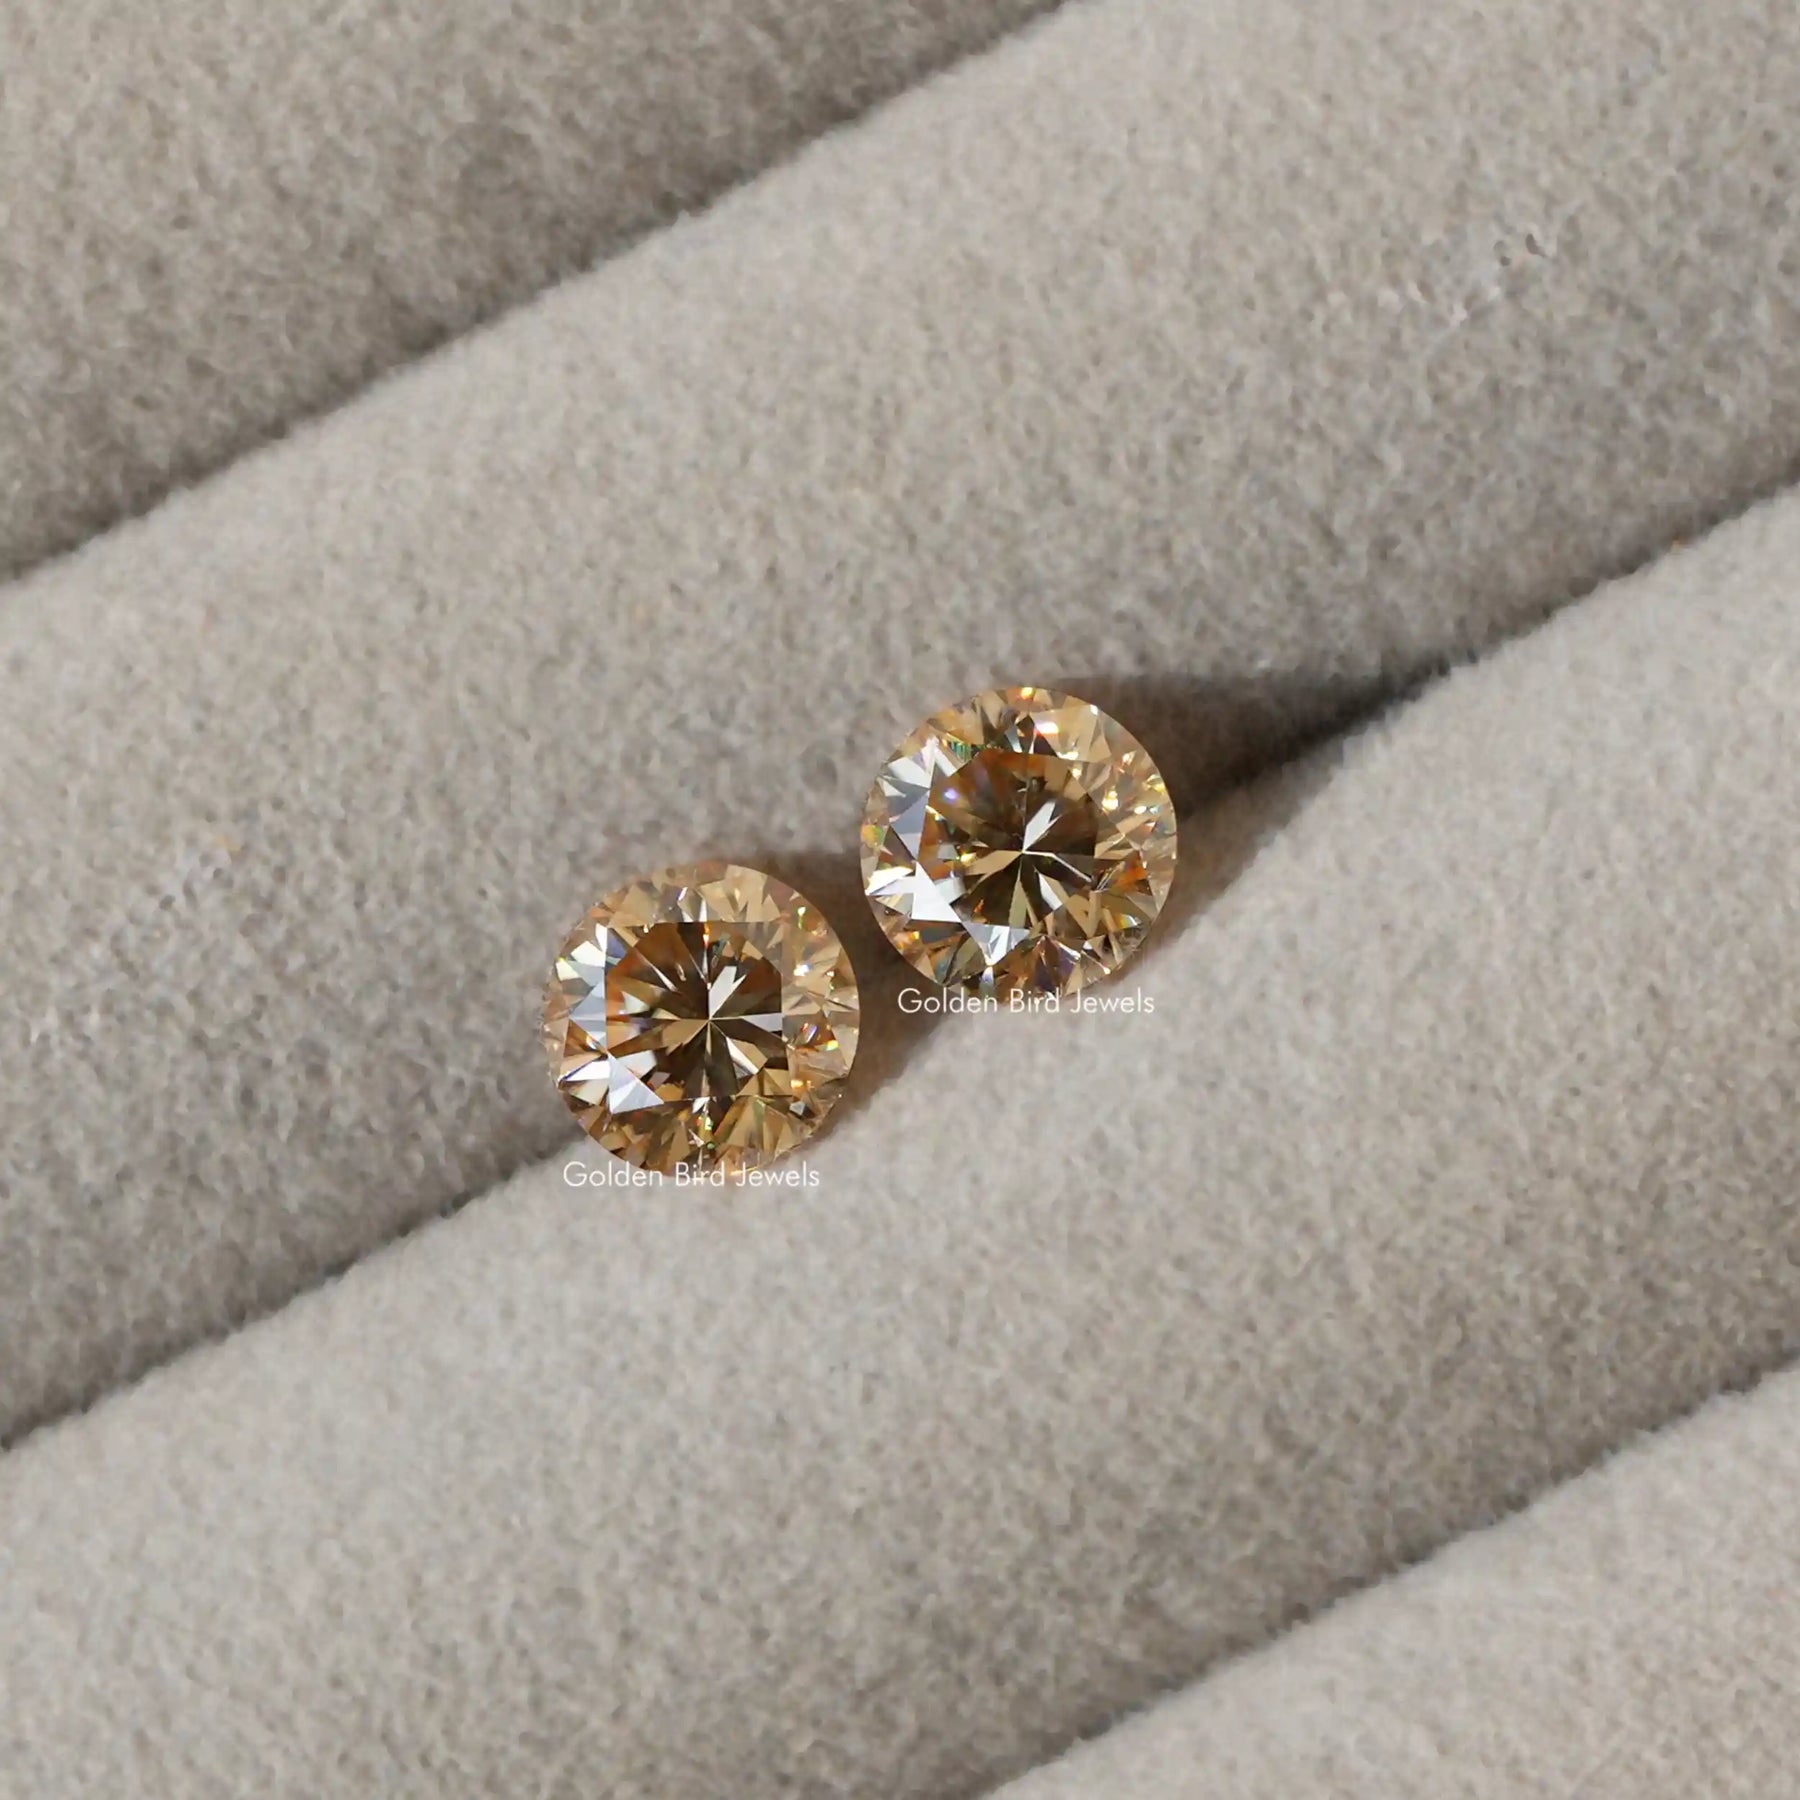 [This matching pair loose stones made of vs clarity]-[Golden Bird Jewels]